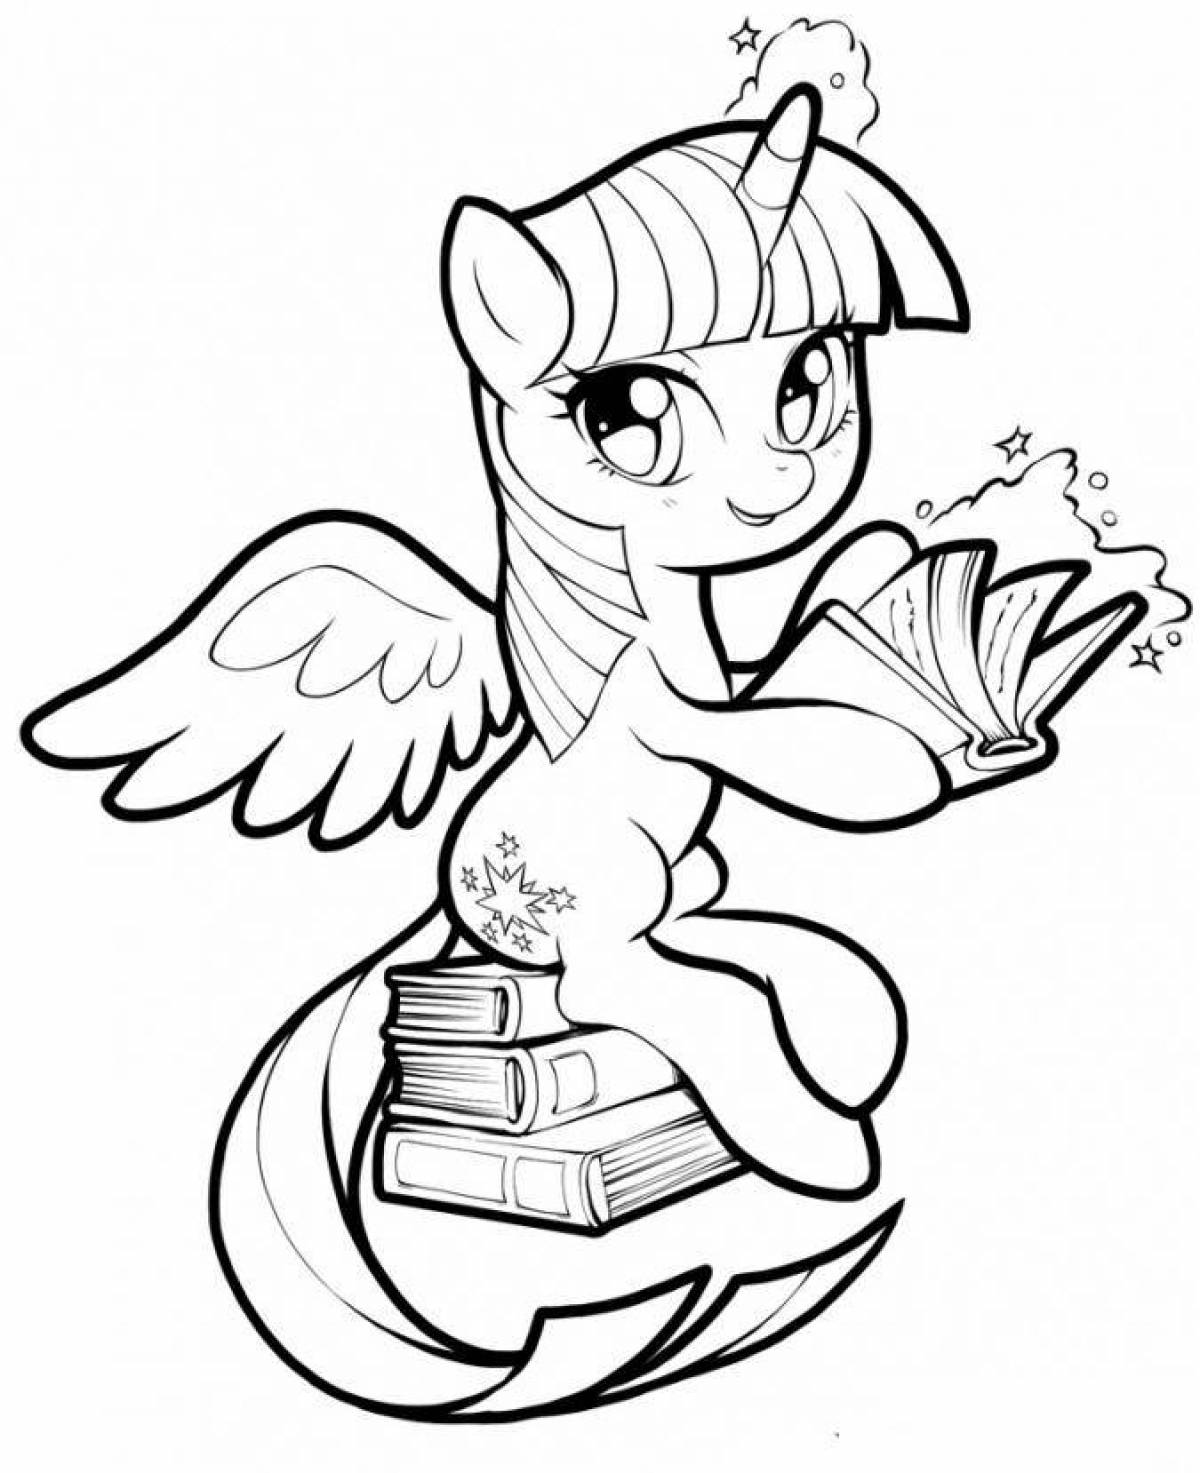 Coloring book cheerful twilight sparkle